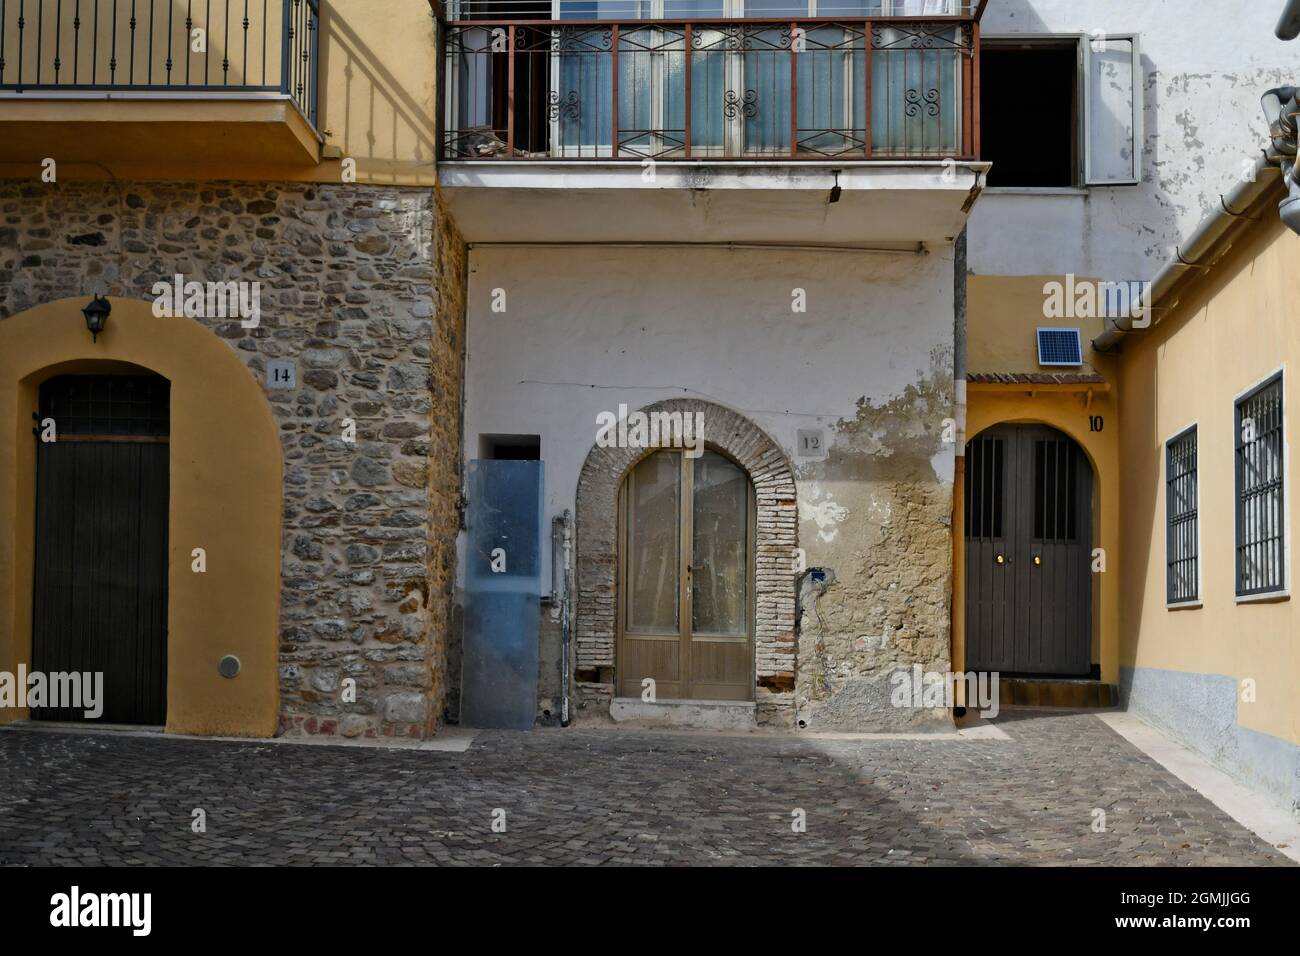 A narrow street in Ascoli Satriano, an old town in the province of Foggia, Italy. Stock Photo